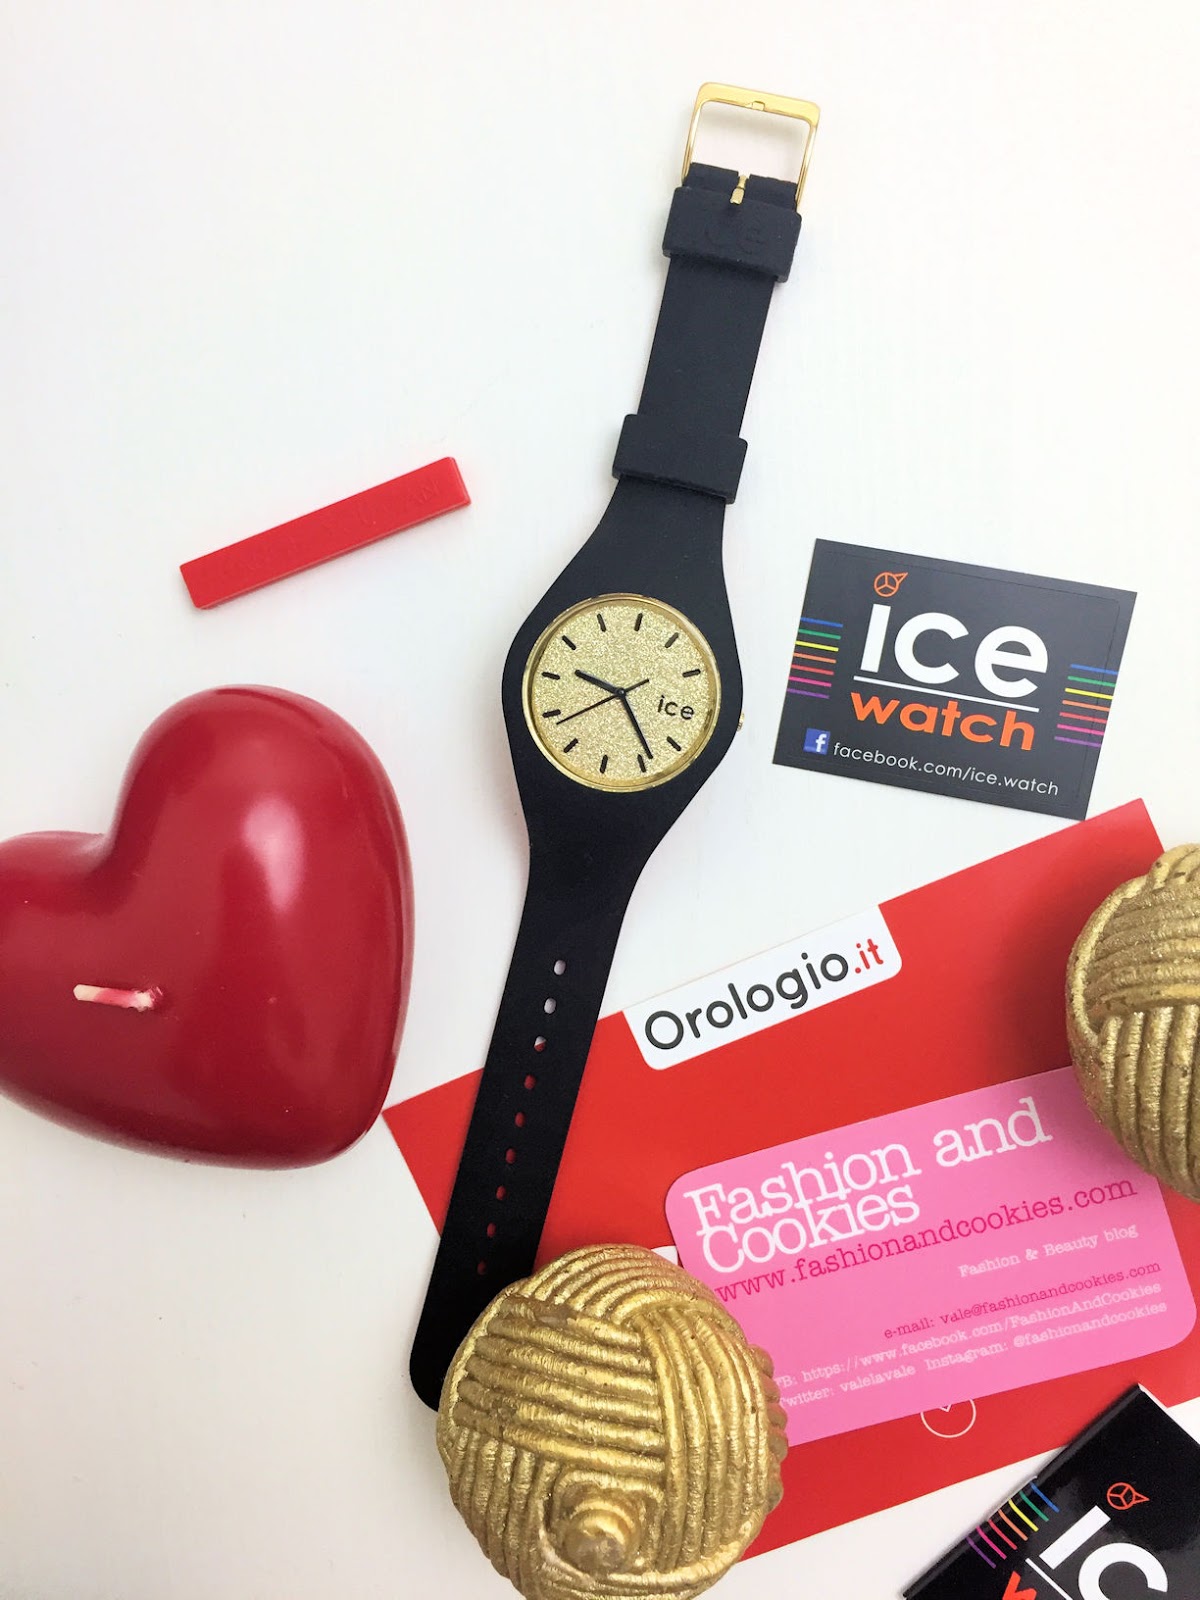 Ice-Watch: a nice gift idea on Orologio.it on Fashion and Cookies fashion blog, fashion blogger style